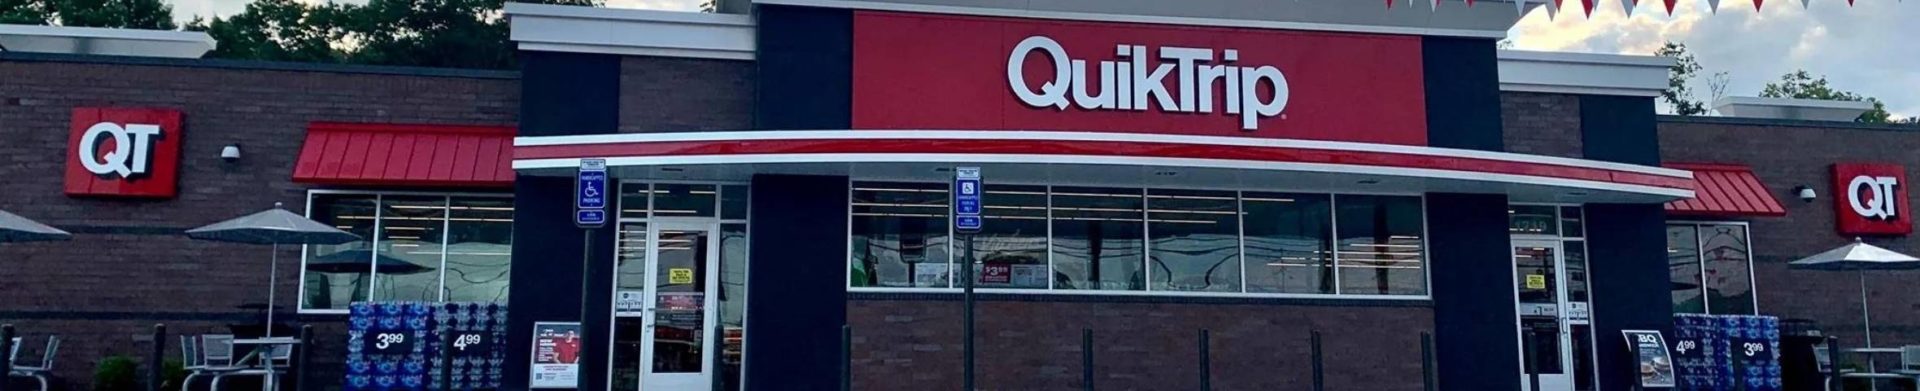 The outside of a QuikTrip location